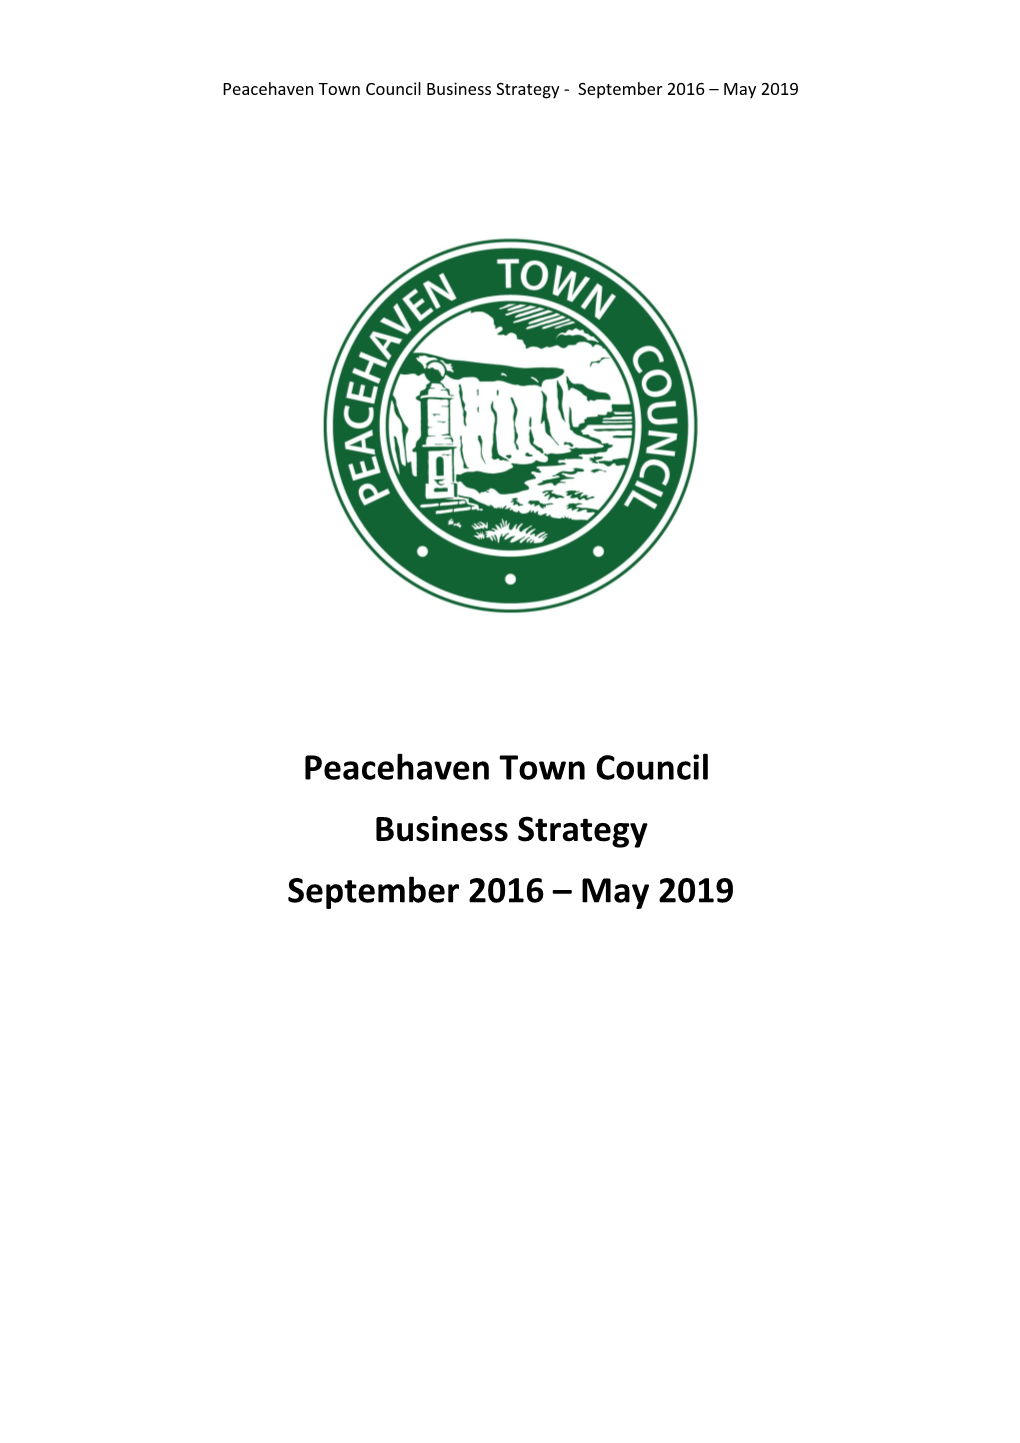 Peacehaven Town Council Business Strategy- September 2016 May 2019